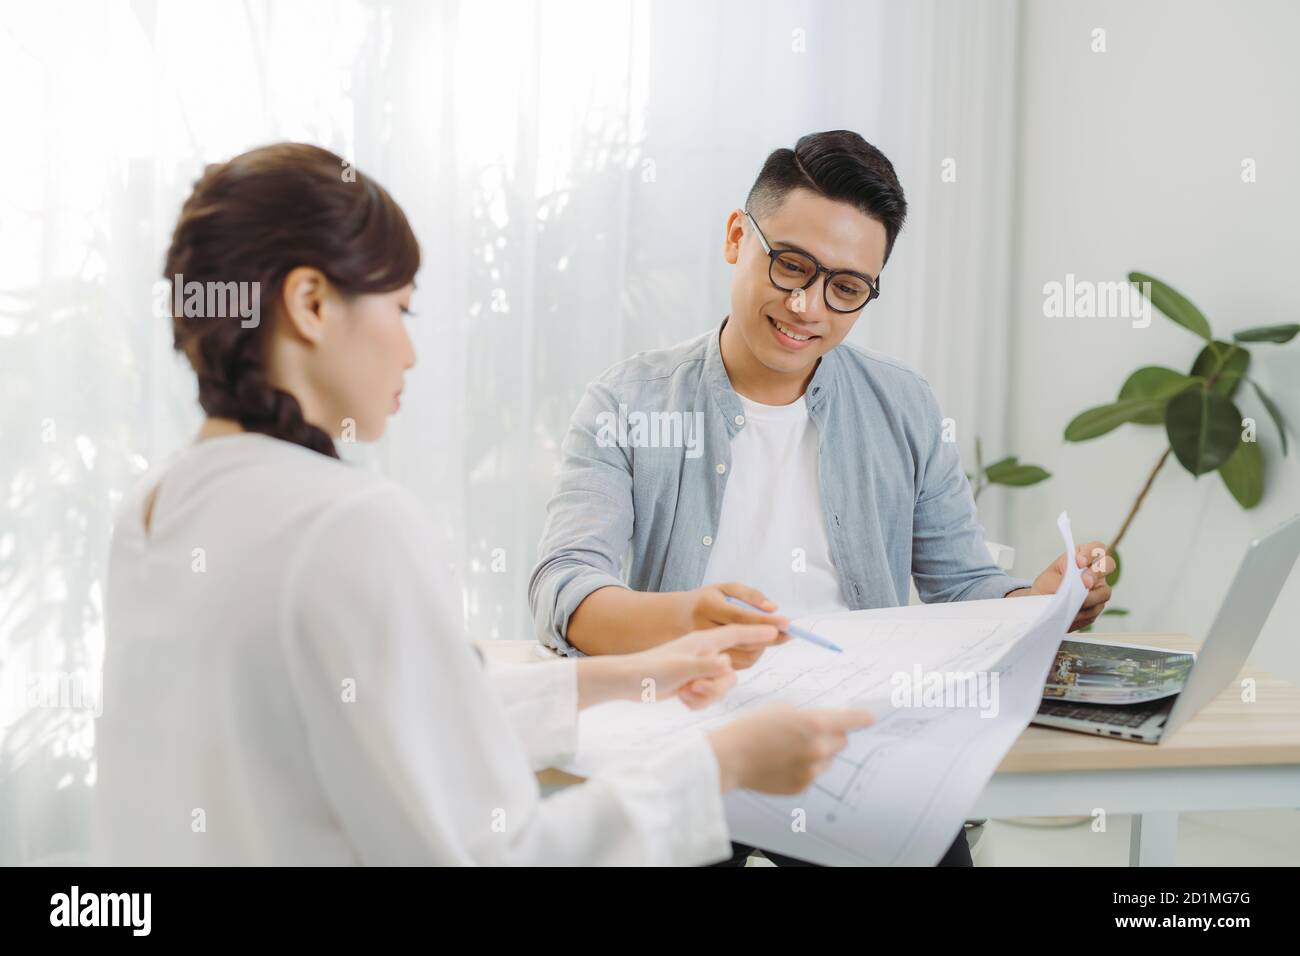 Male and female architect discussing a set of blueprints spread out on a table at office. Stock Photo